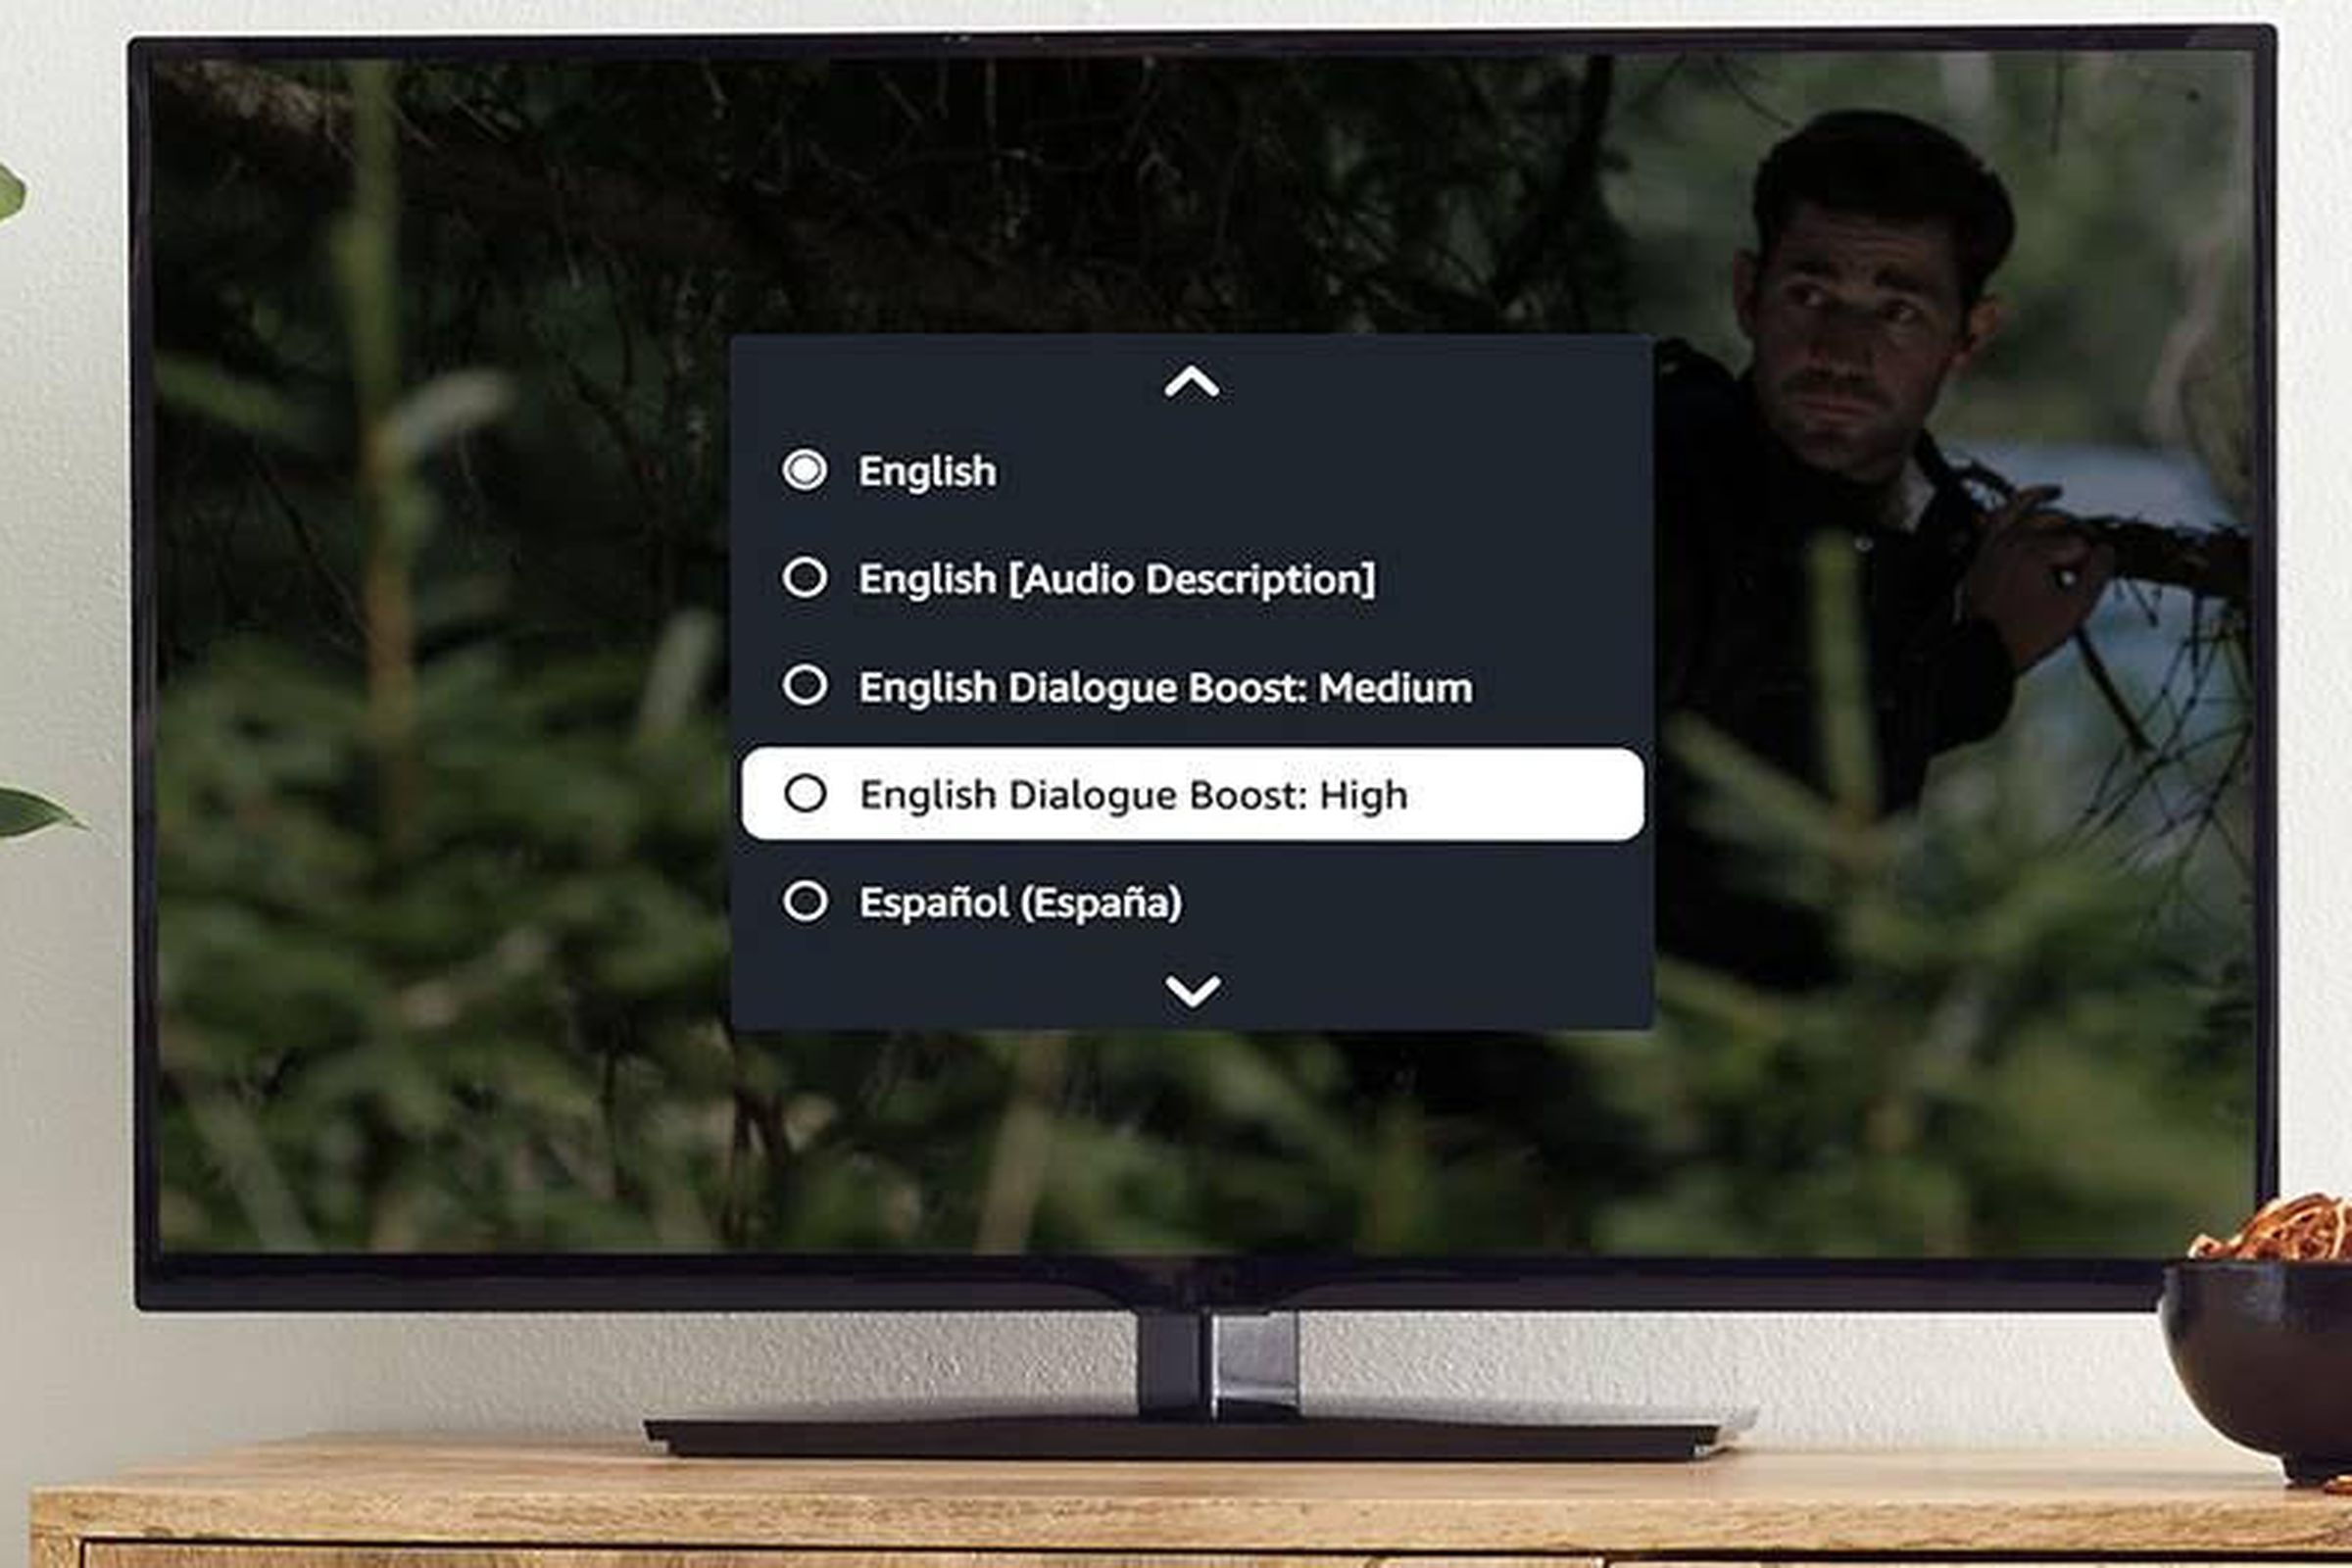 A screenshot of the new Dialogue Boost feature available from Amazon Prime Video.